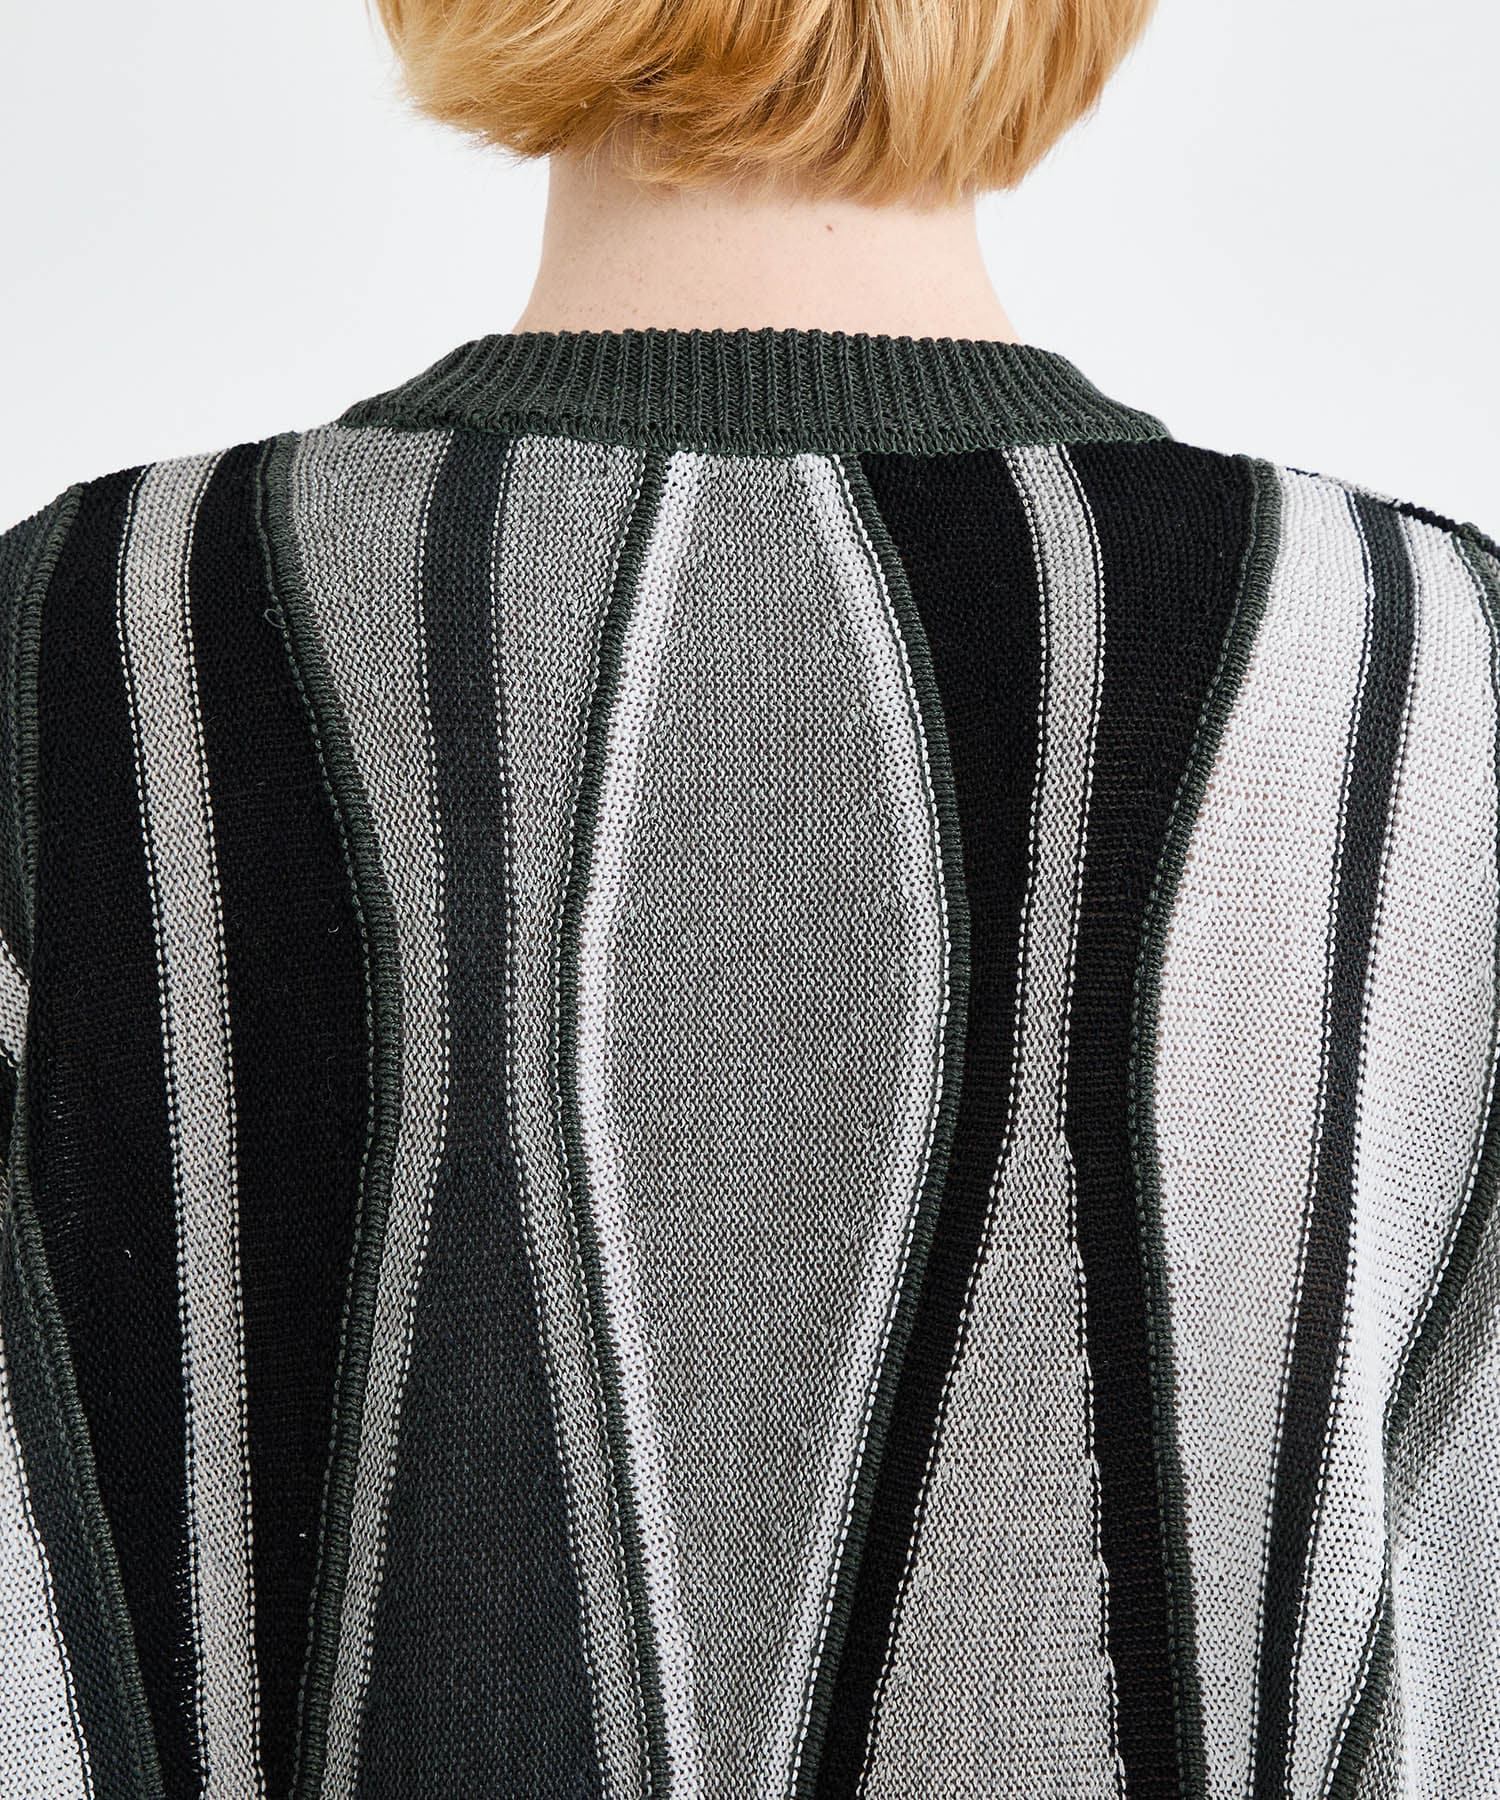 7G FEATHER STRIPE KNIT PULLOVER(1 GREY): Children of the discordance ...